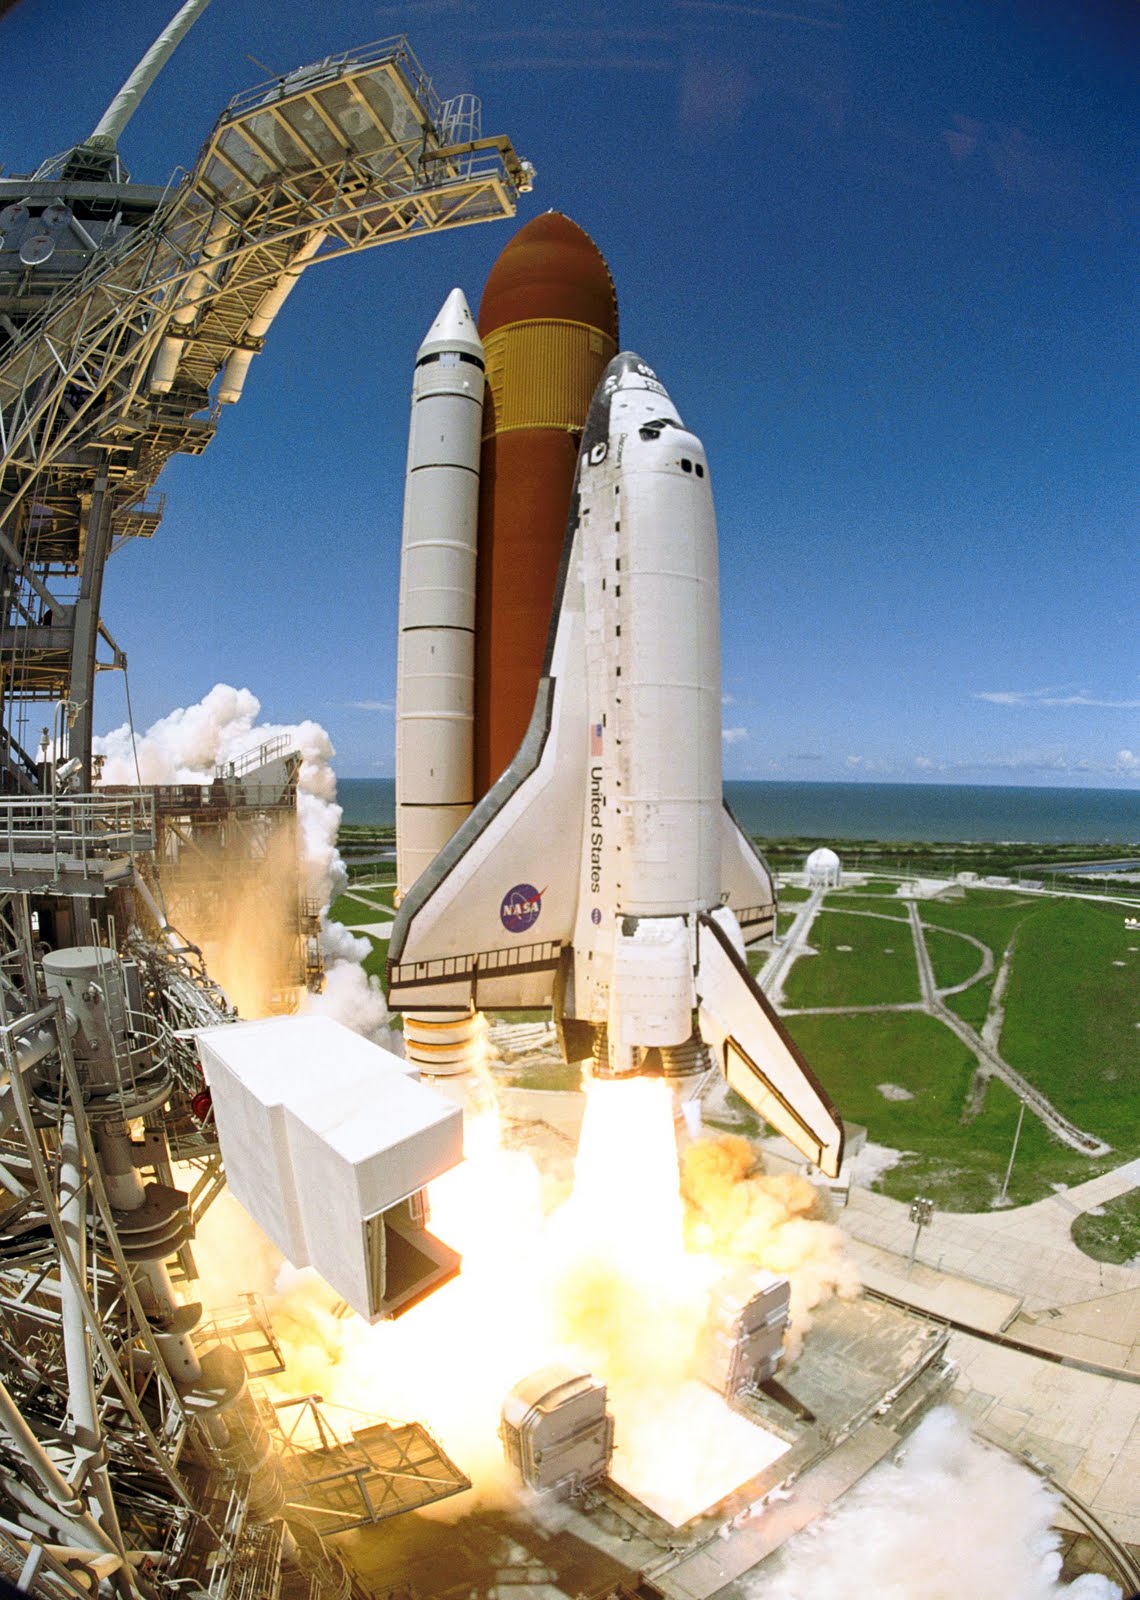 The space shuttle on the launch pad